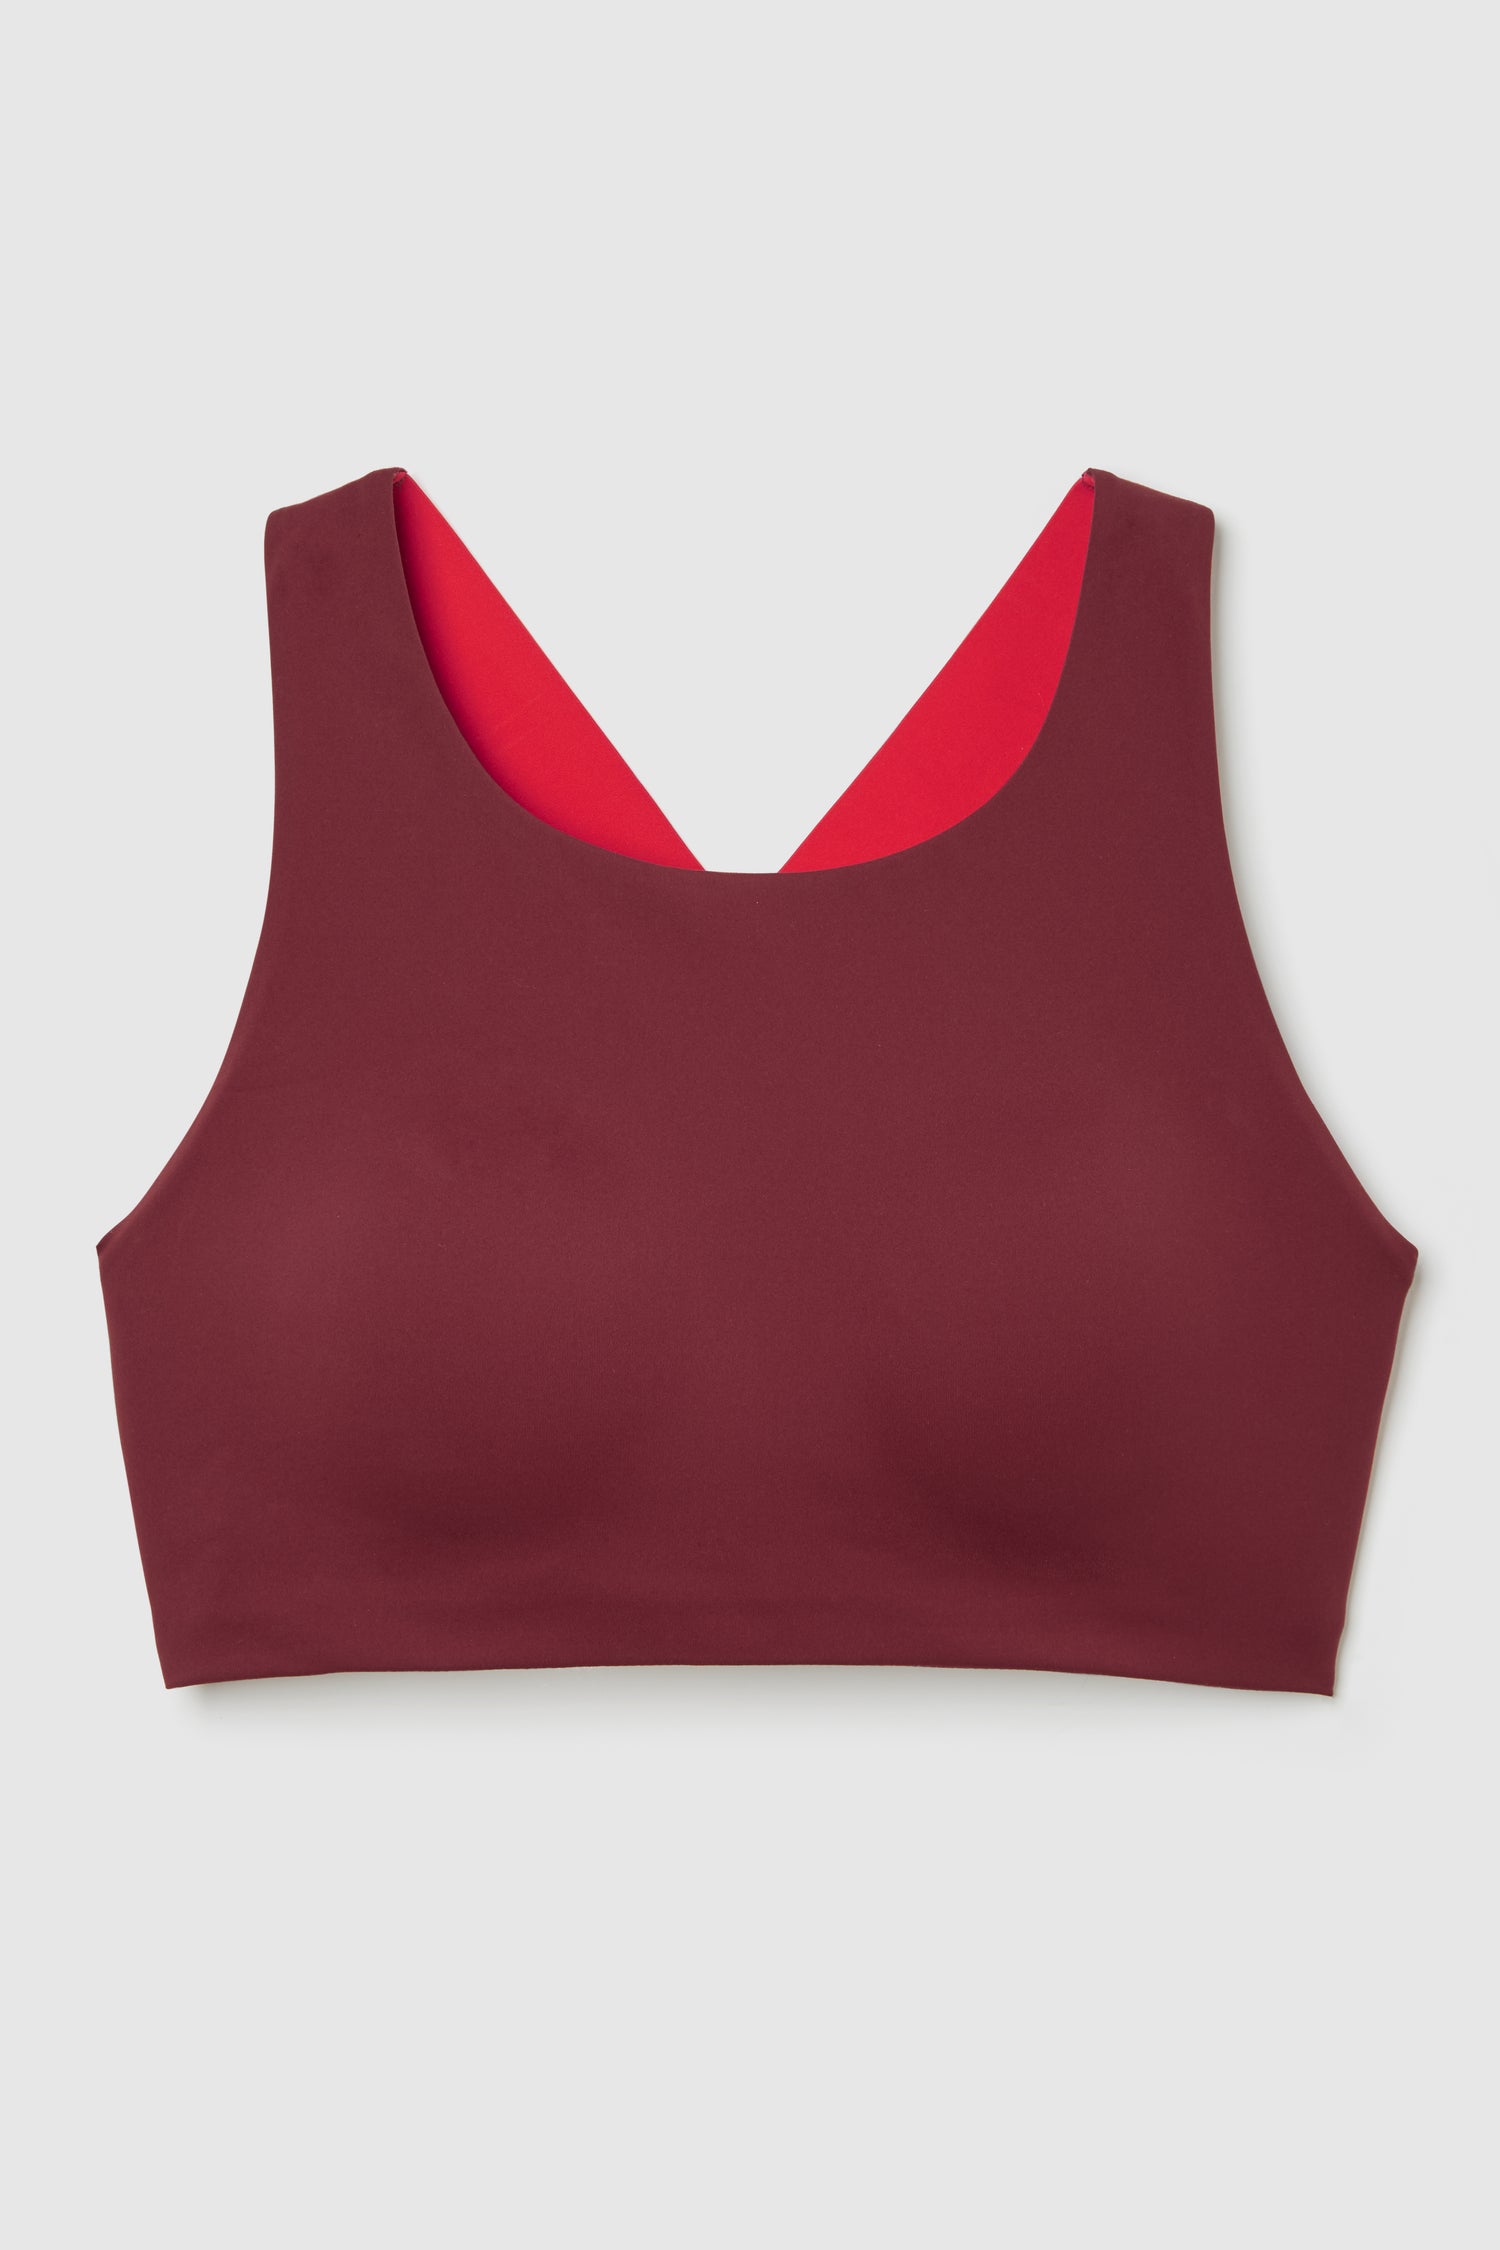 FWD Women's On The Fly Multi Push Sports Bra – Ernie's Sports Experts